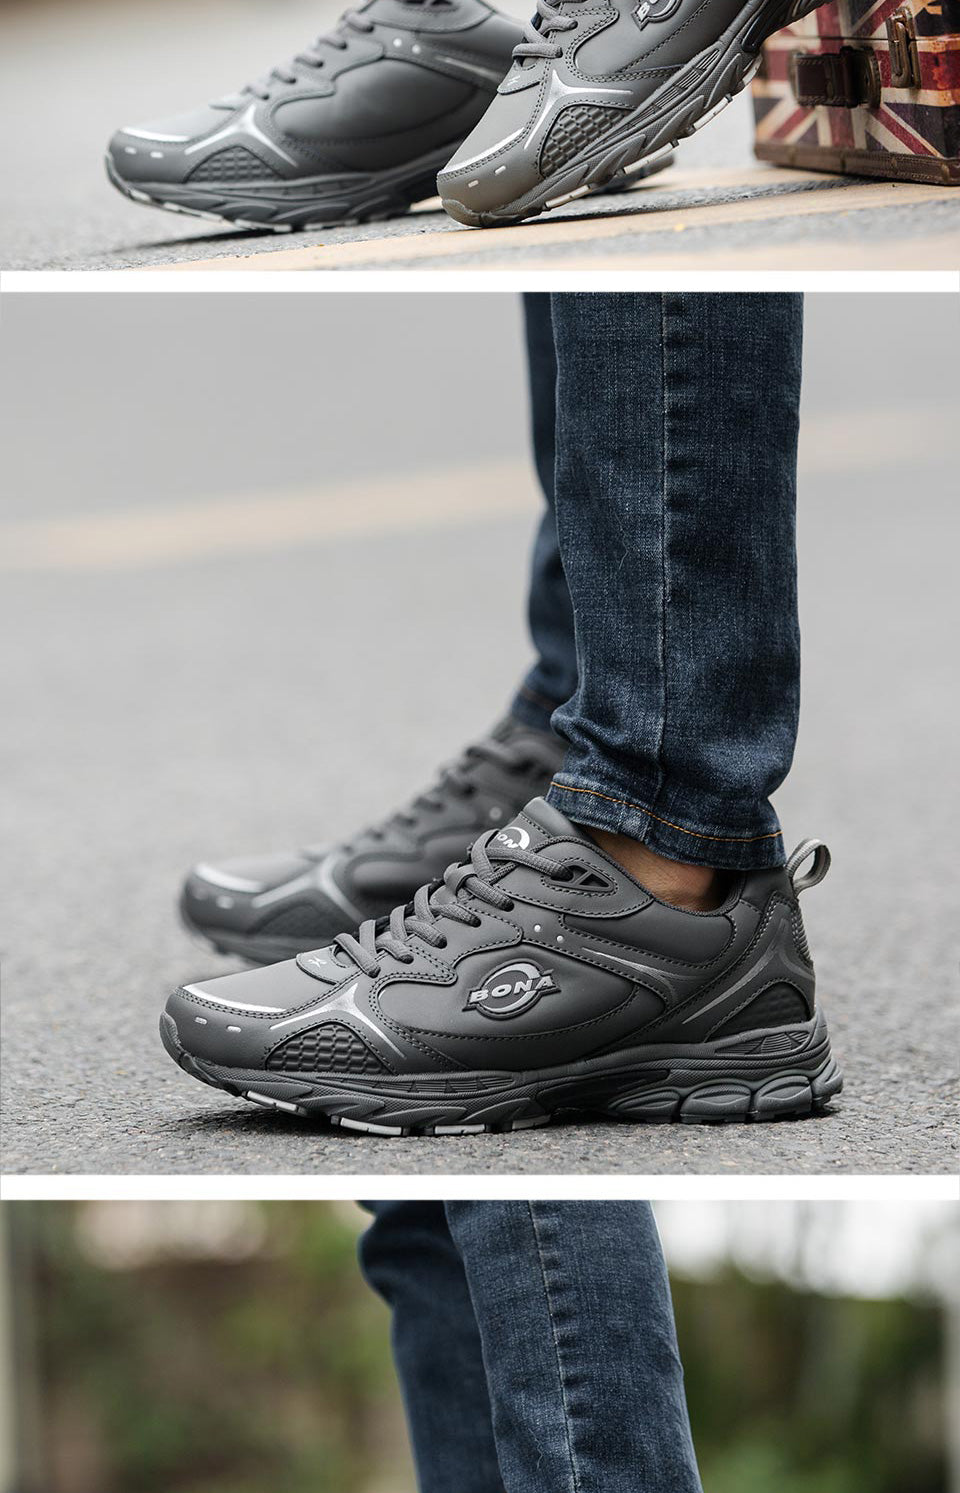 Classics Style Men Running Shoes Lace Up, Men Sport Shoes, Leather Men Outdoor Jogging Sneakers Comfortable